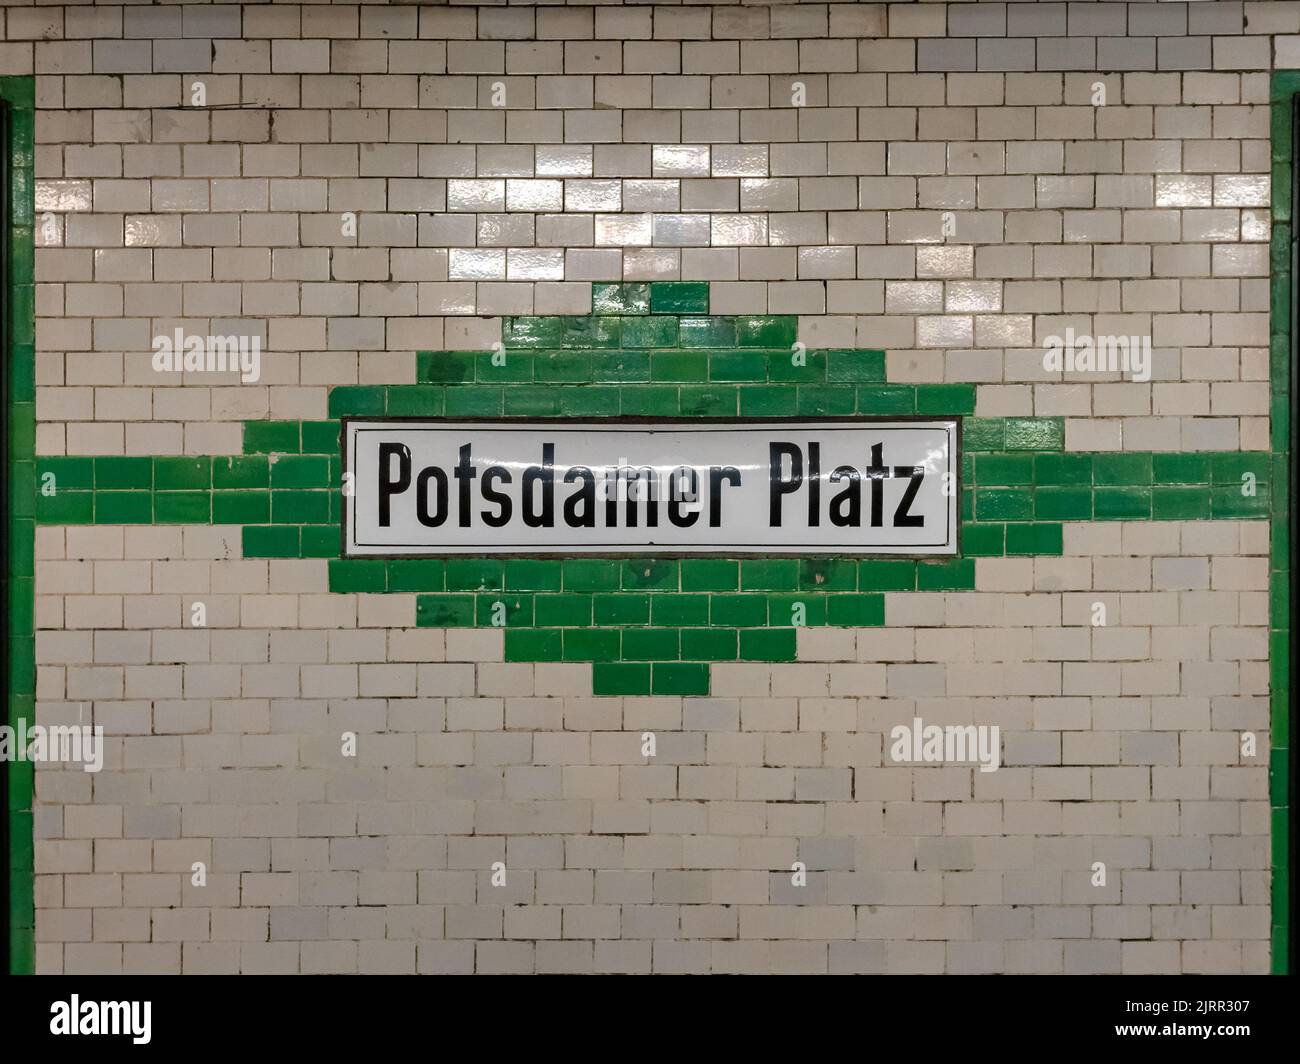 Potsdamer Platz U-Bahn station in Berlin city. Old design with a tiled wall exterior. Black letters on a white board. Subway station name board. Stock Photo